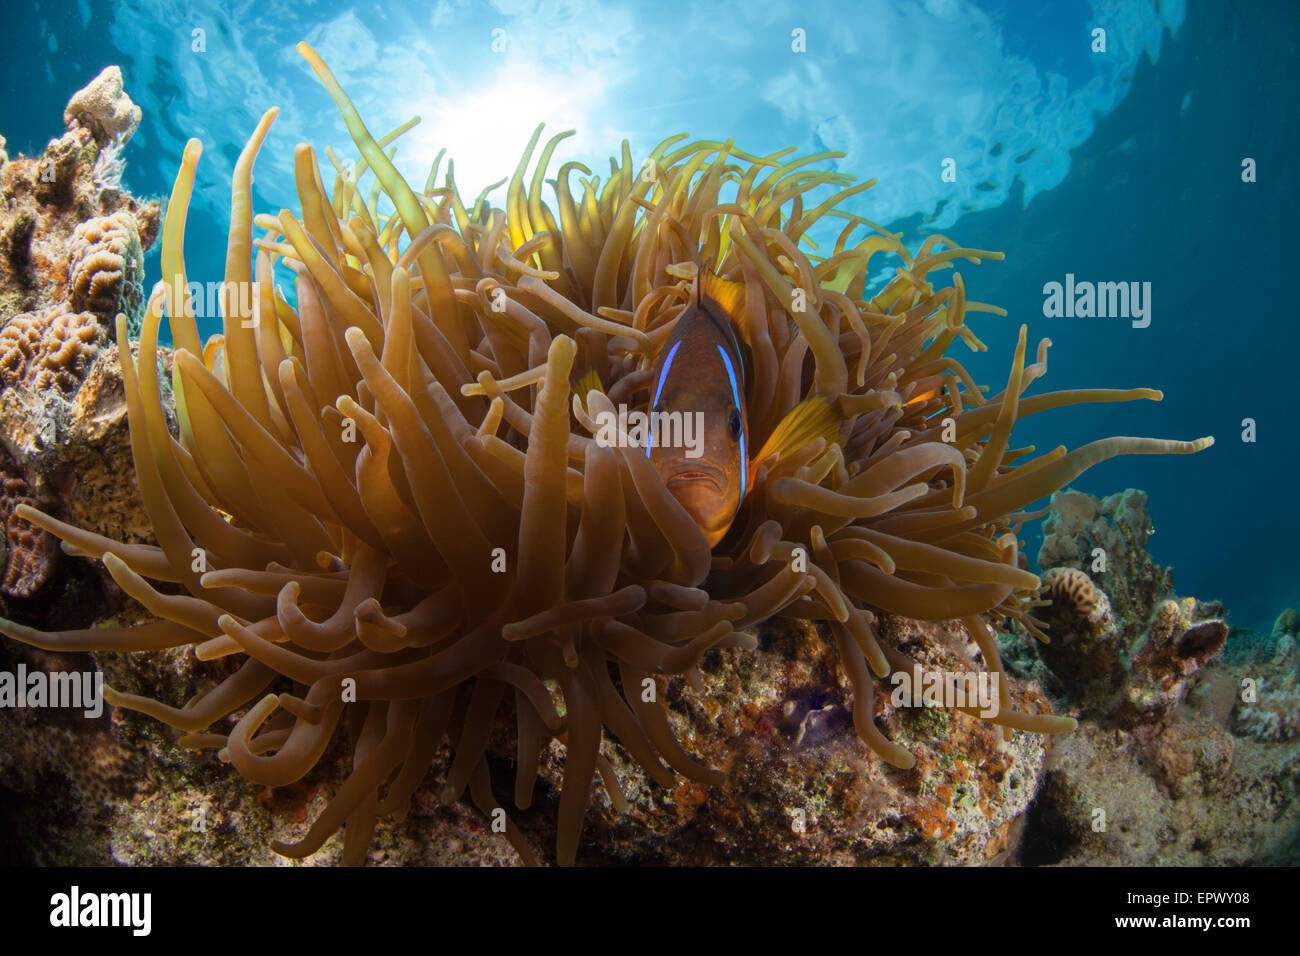 Anemone and Anemonefish, sun ball is in the background Stock Photo